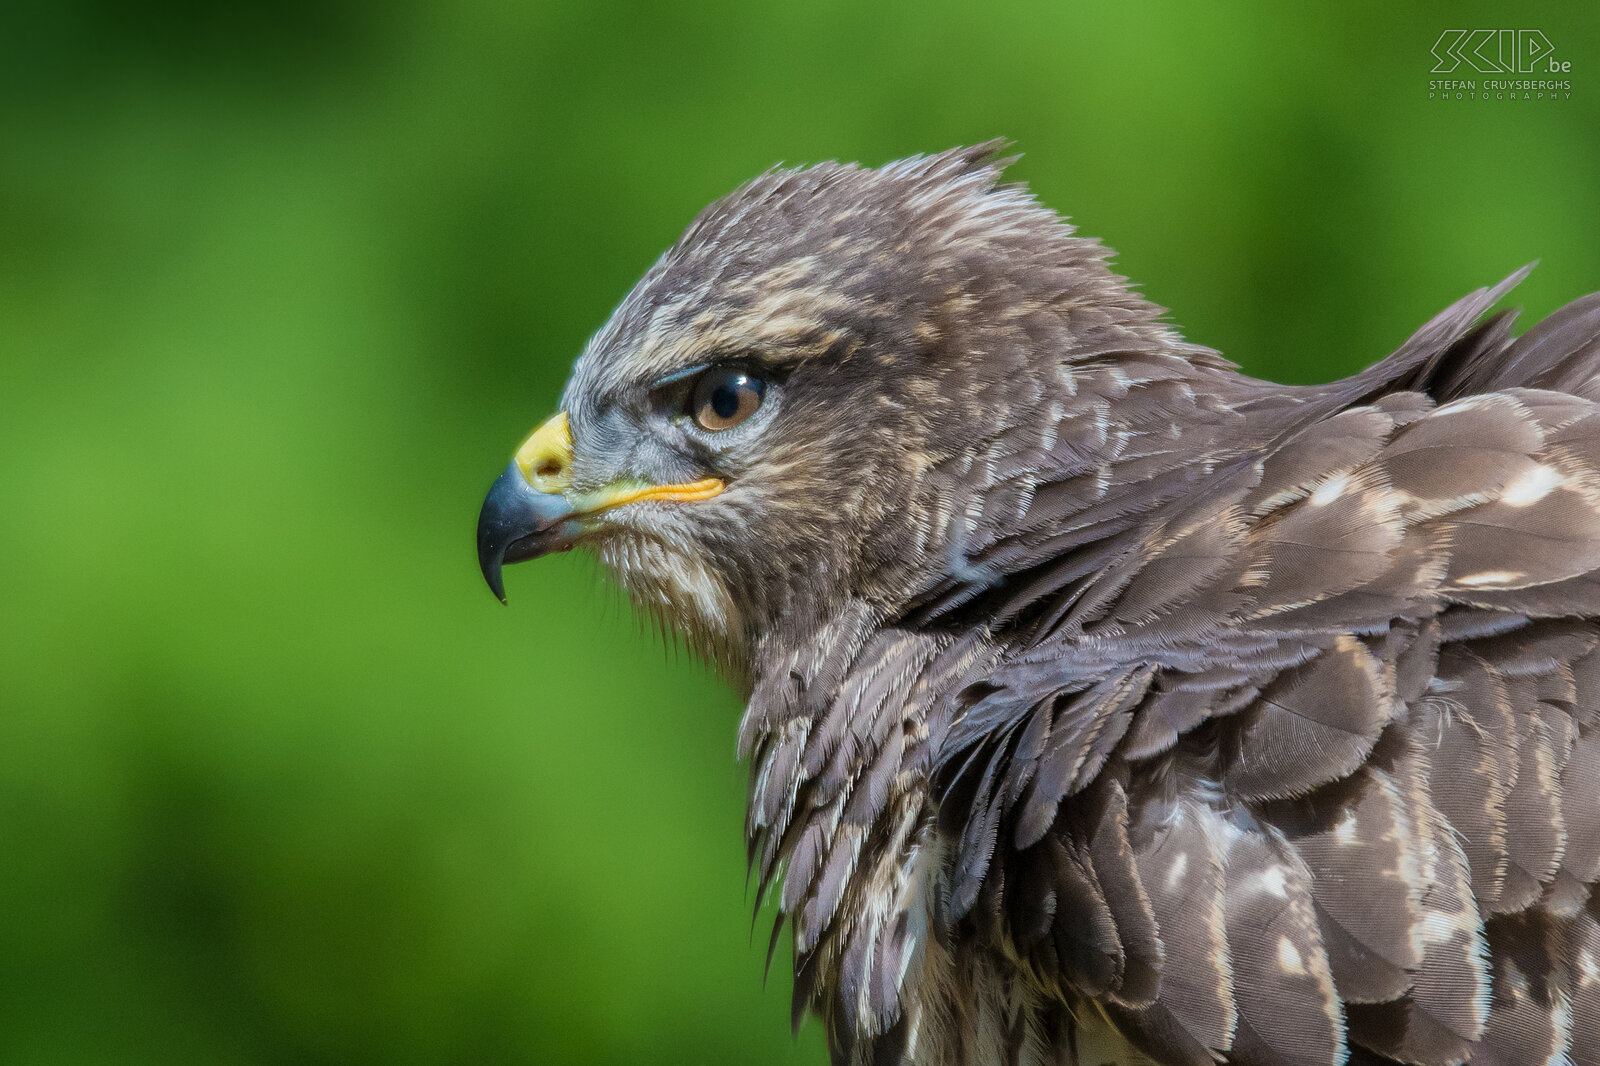 Birds of prey - Close-up buzzard The common buzzard (Buteo buteo) hunts on open fields, but usually nestles in forest edges. Normally the prey of a buzzard consists of small mammals, amphibians and small birds, but on occasion it is also a scavenger. Stefan Cruysberghs